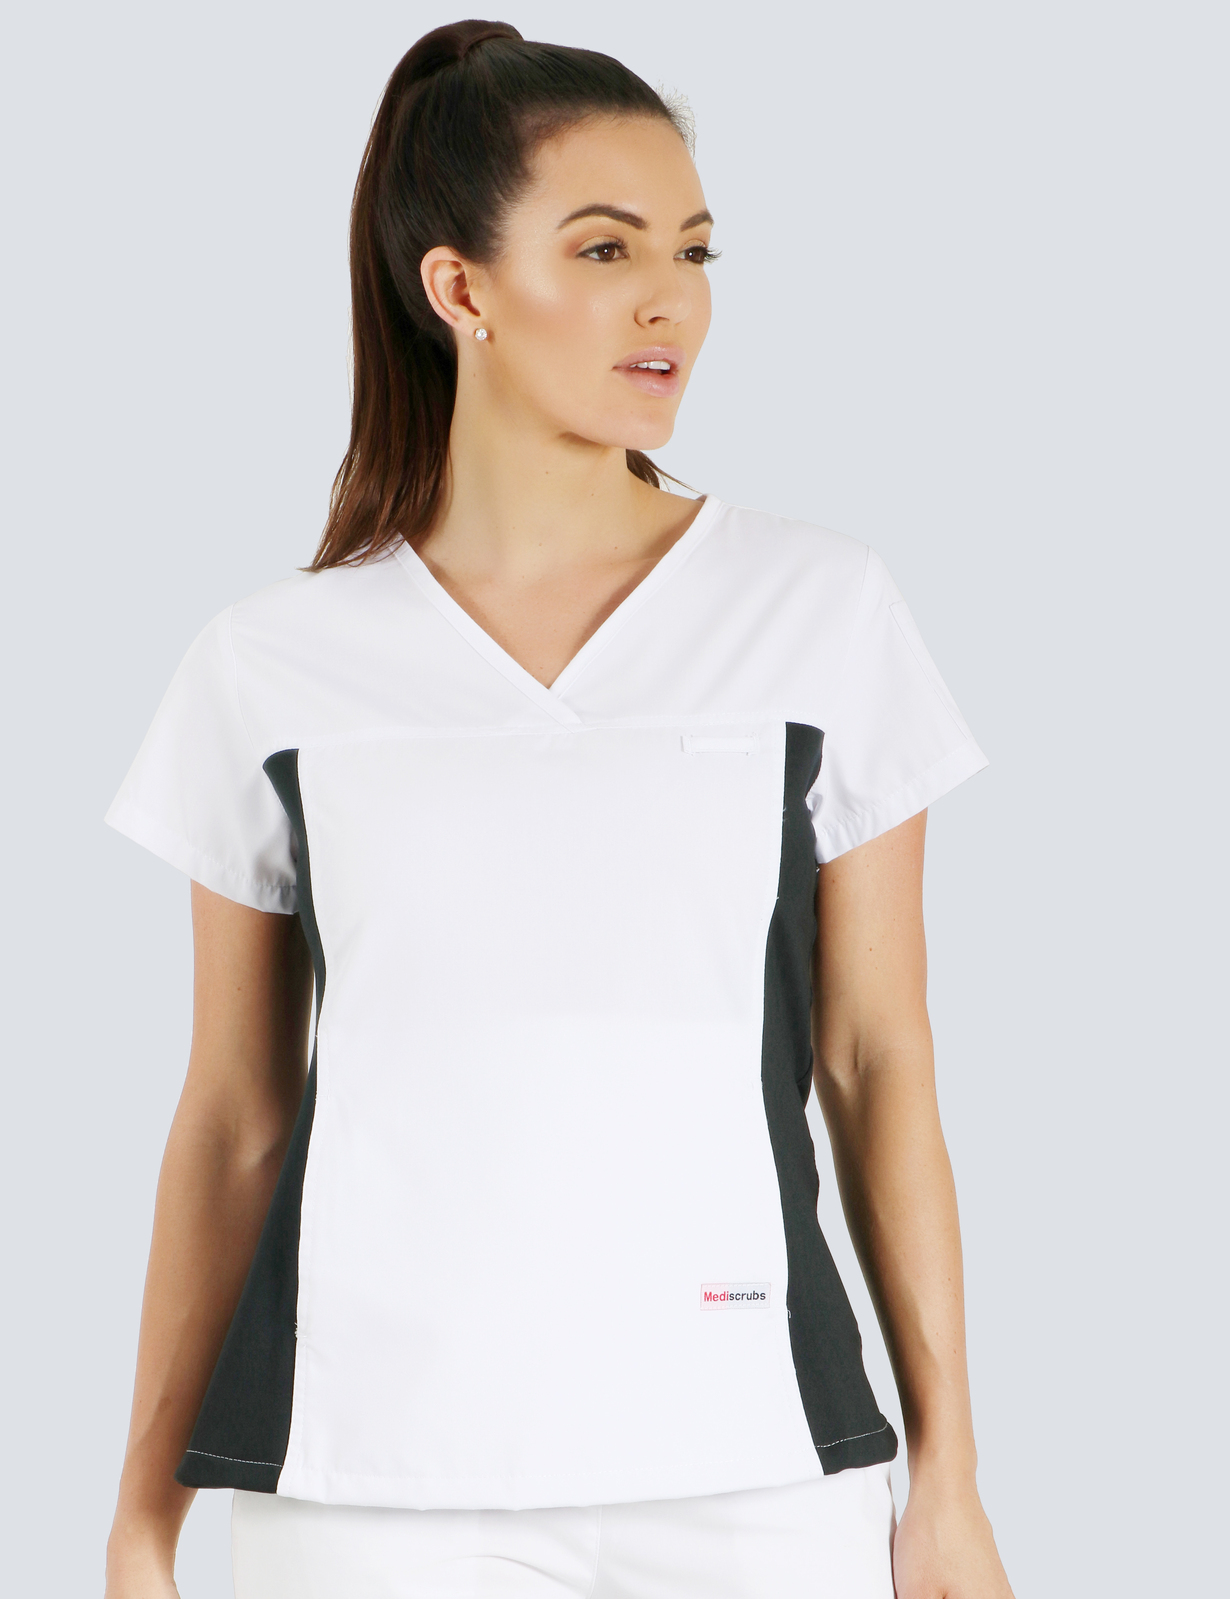 Ashmore Retreat Endorsed Enrolled Nurse Top Only Bundle (Women's Fit Spandex in White incl Logo) 